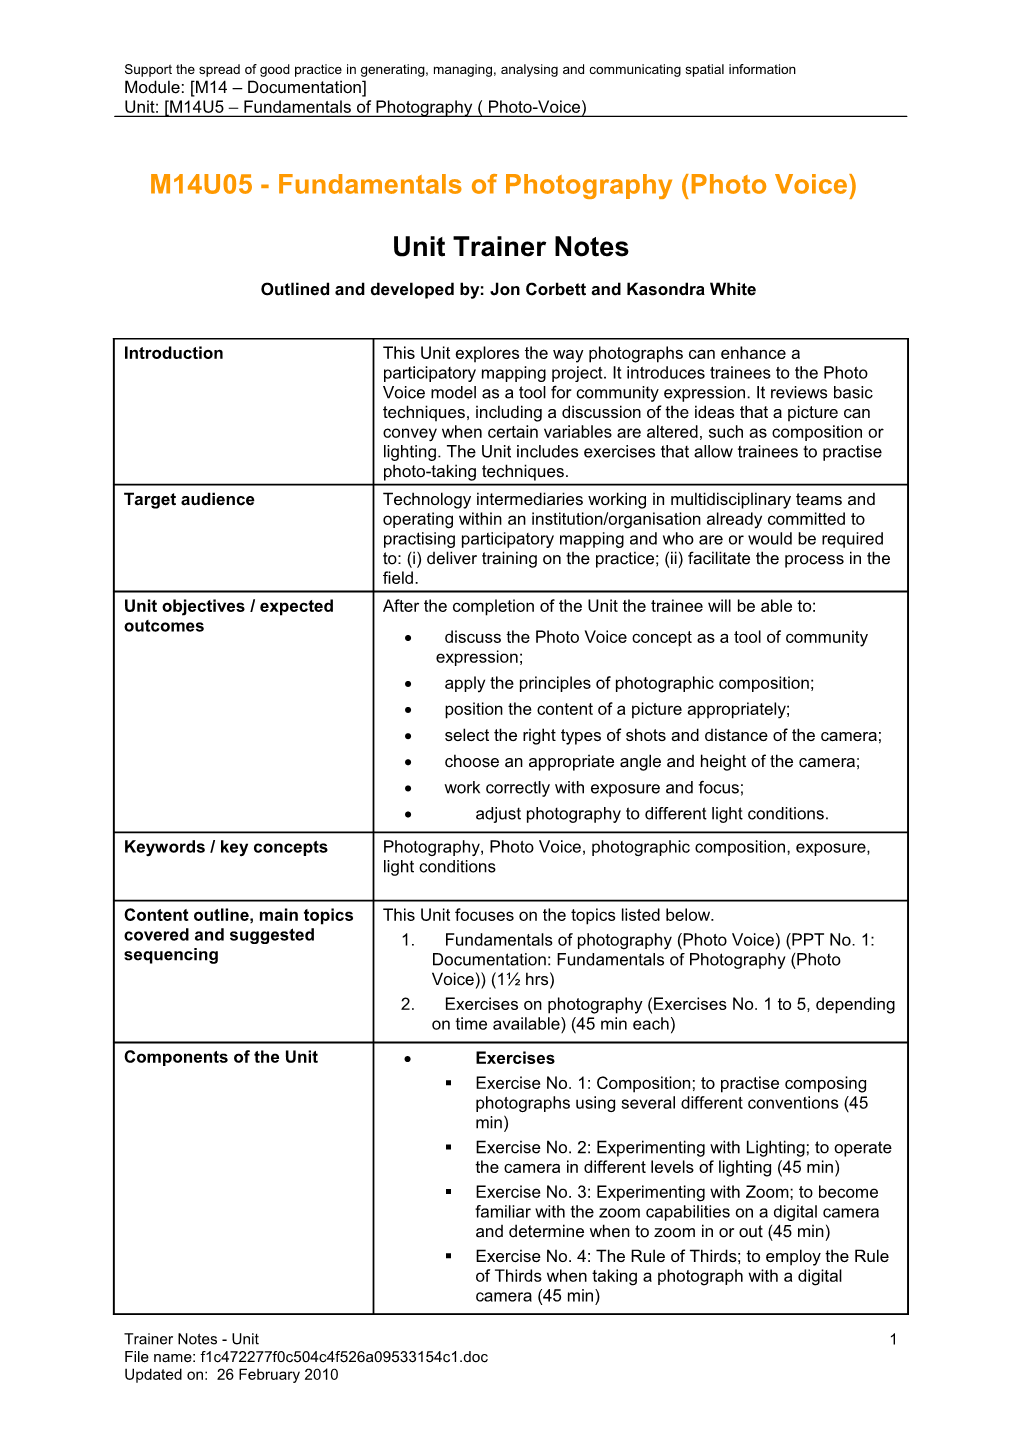 Unit Trainer Notes - Fundamentals of Photography (Photo-Voice)